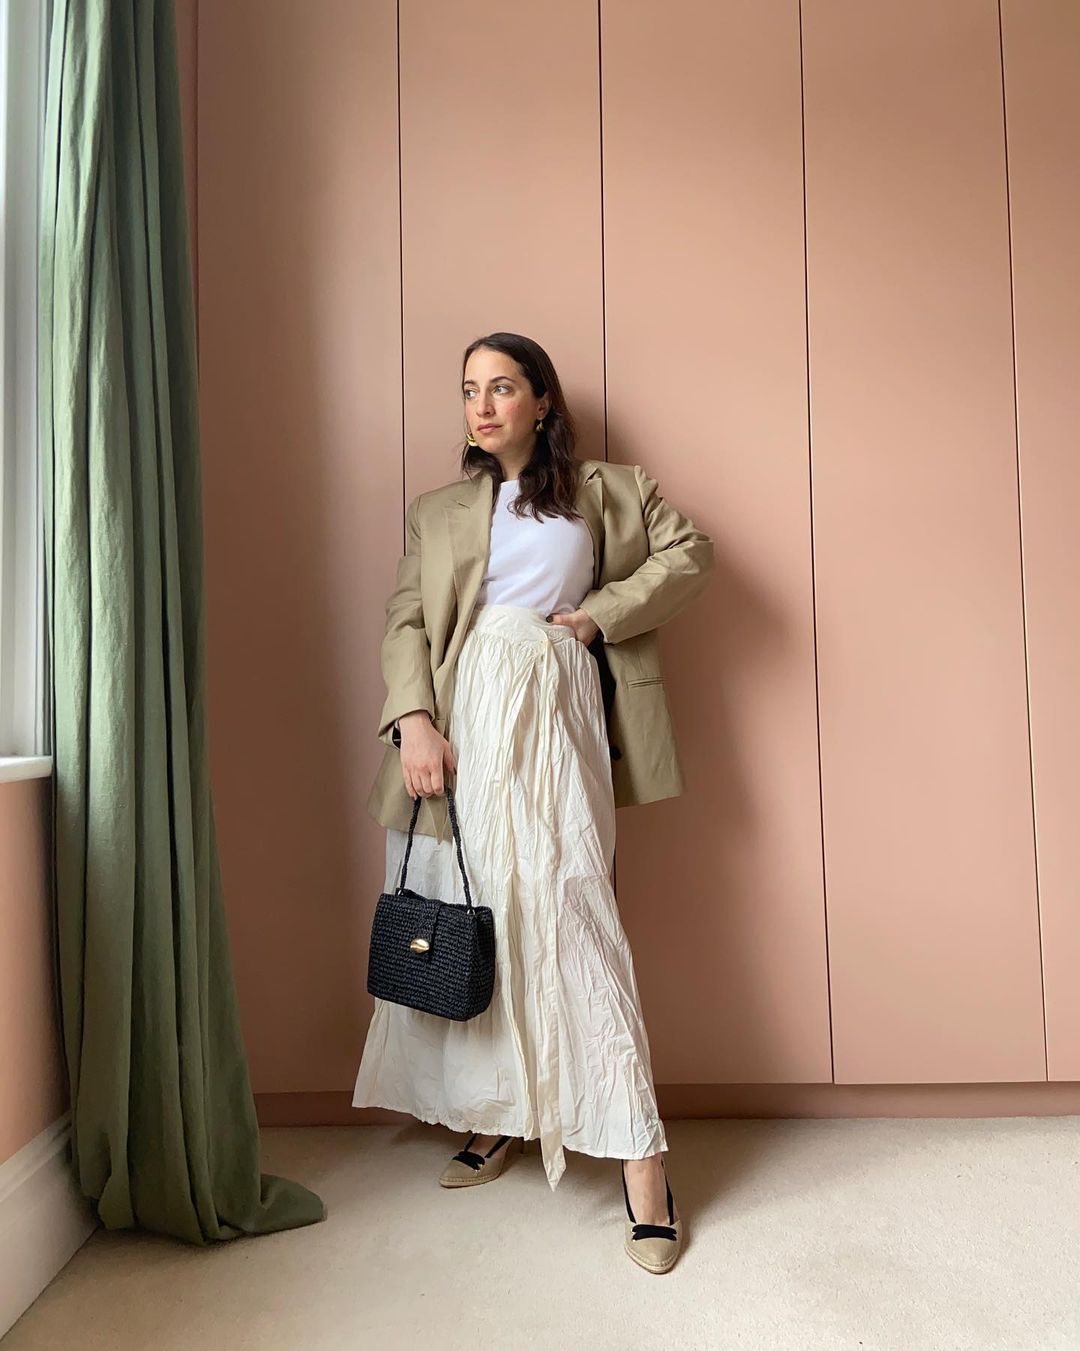 Marks and Spencer editor picks: @hannahalmassi wears a beige blazer and maxi skirt